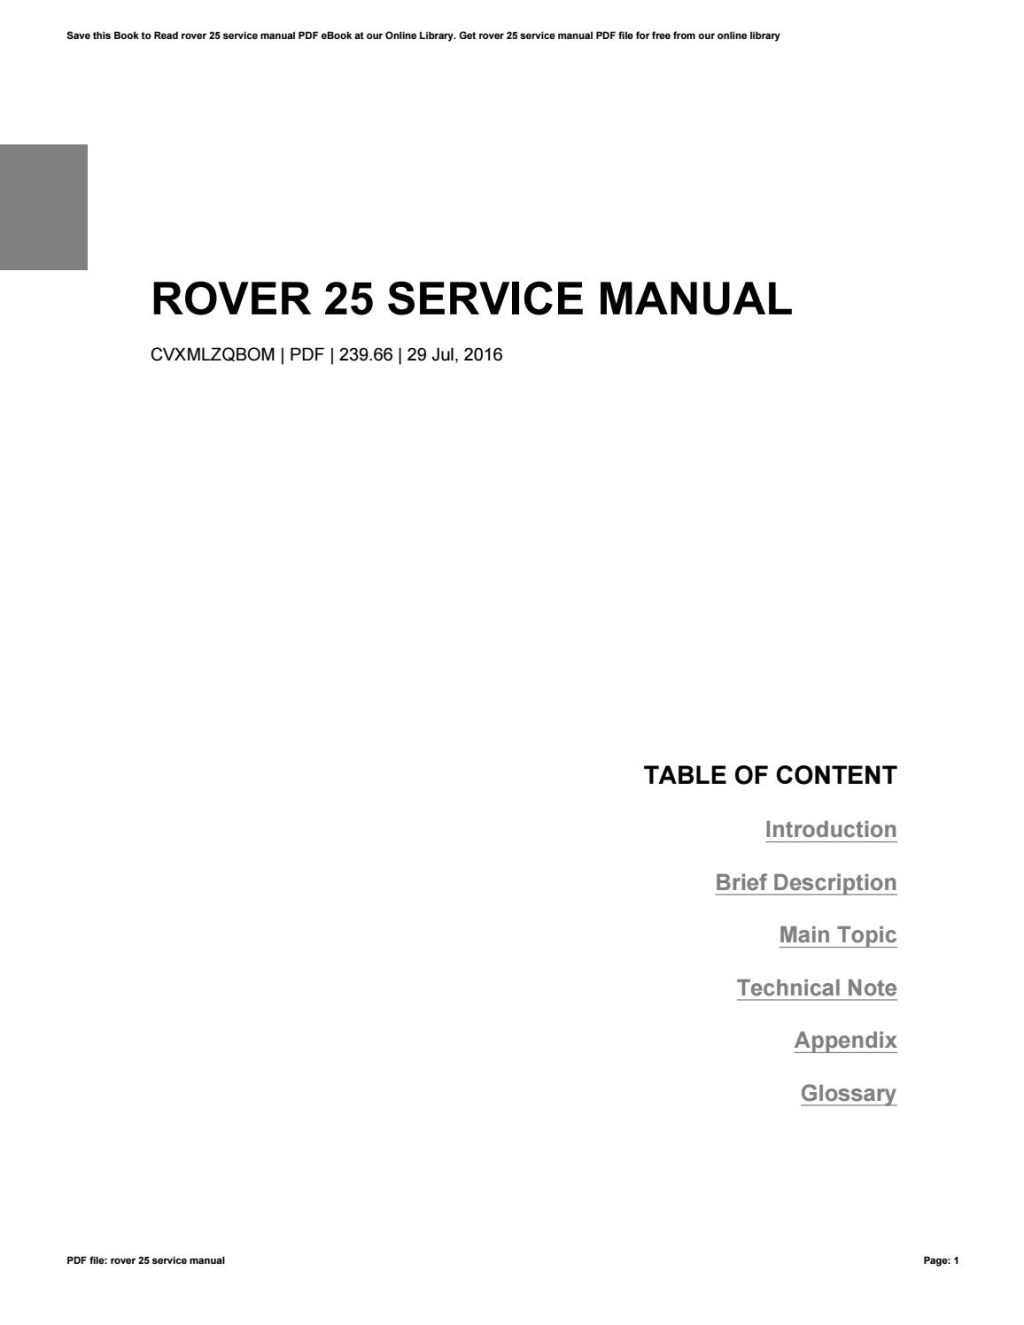 Picture of: Rover  service manual by u7 – Issuu